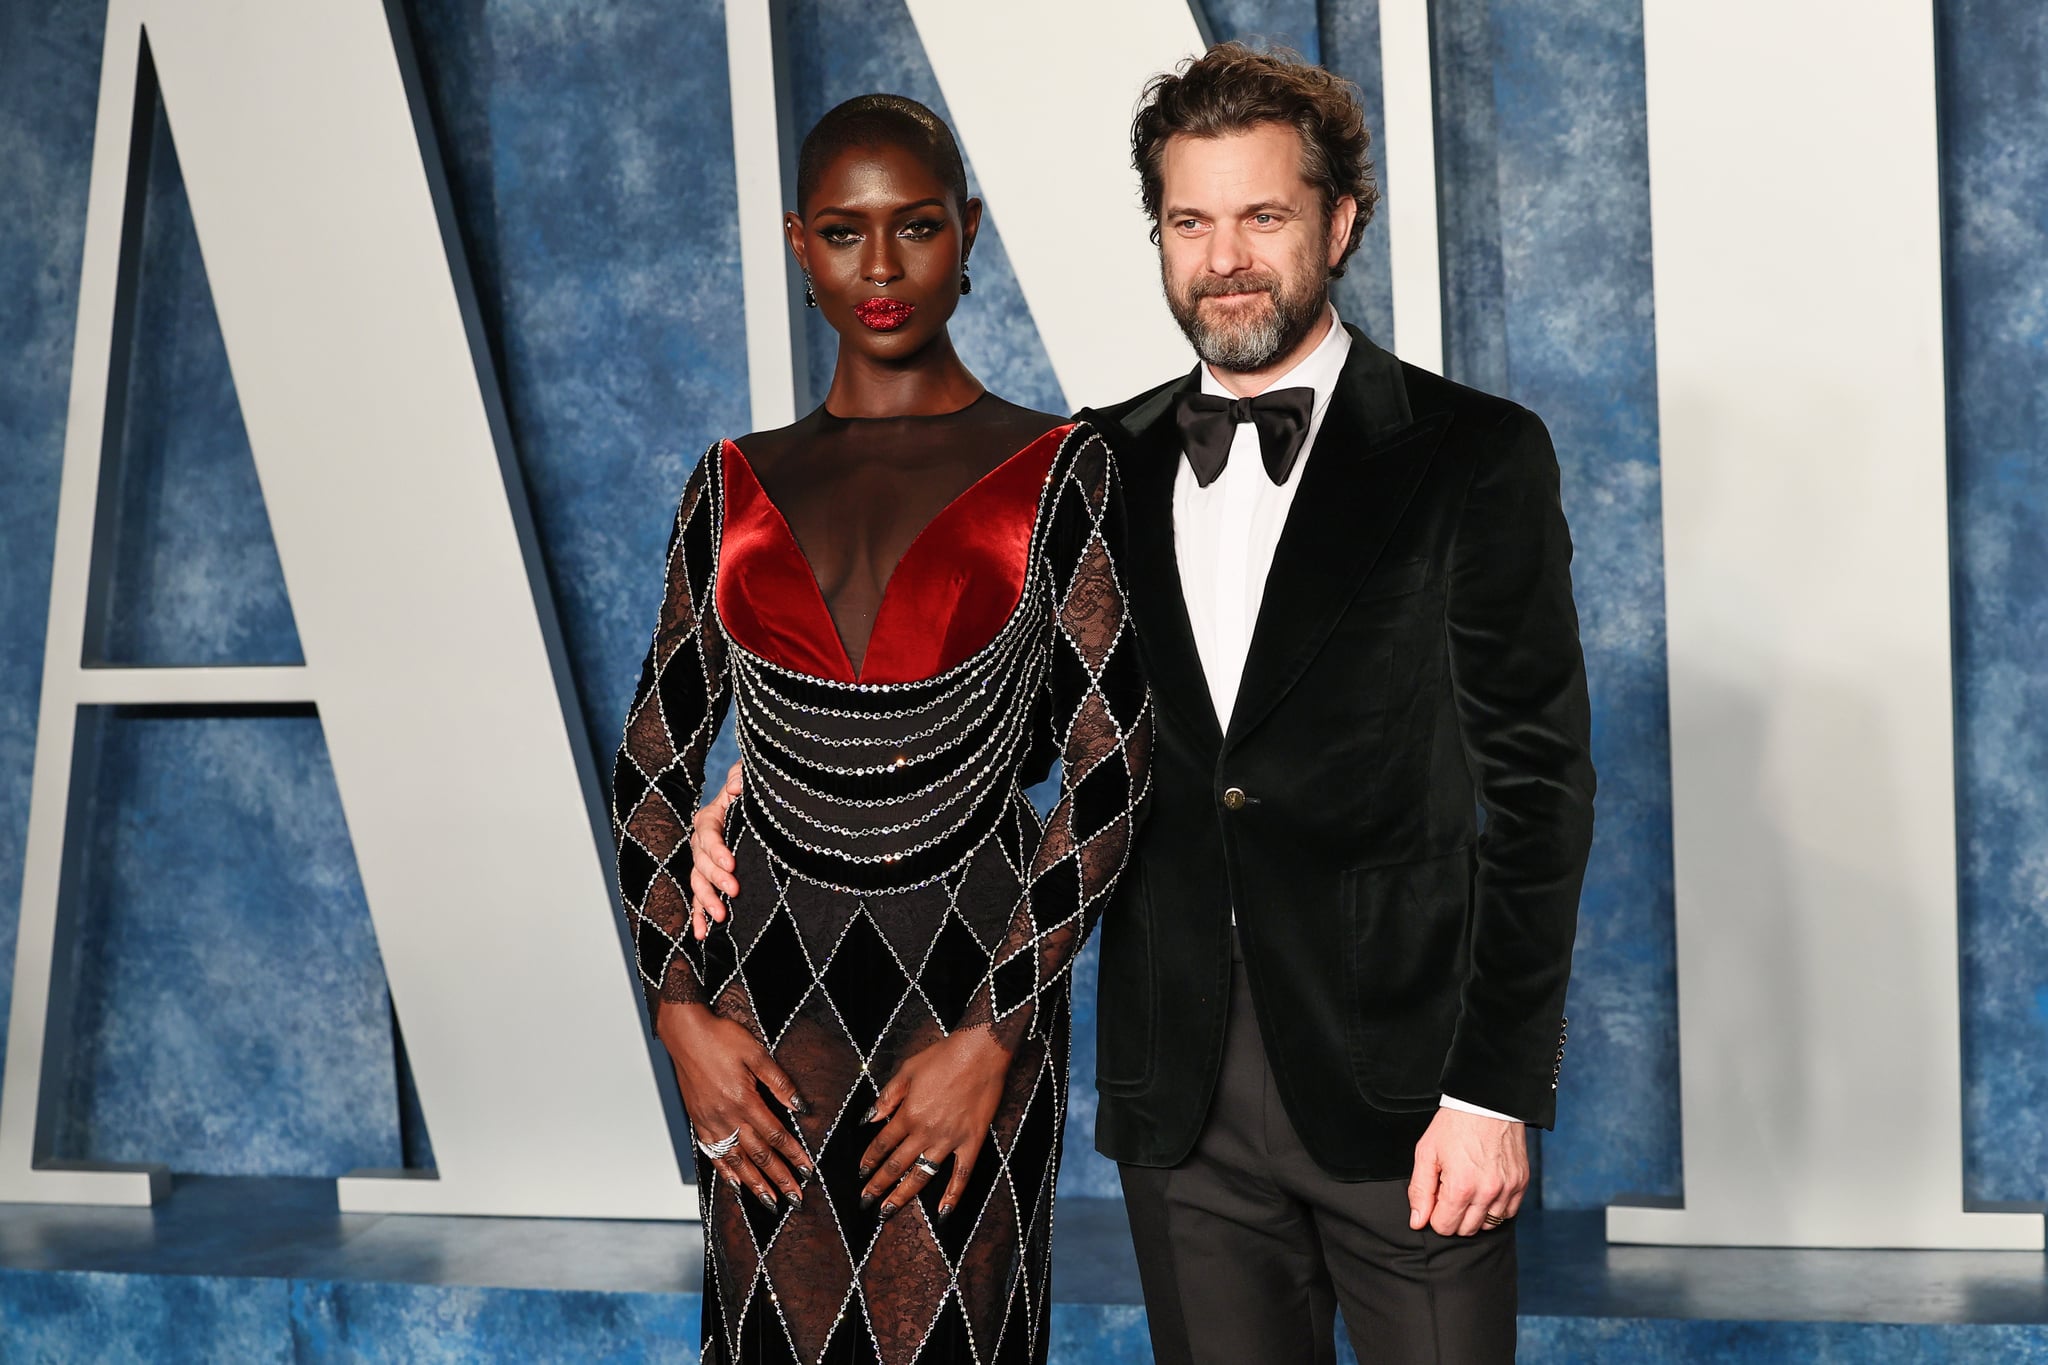 BEVERLY HILLS, CALIFORNIA - MARCH 12: (L-R) Jodie Turner-Smith and Joshua Jackson attend the 2023 Vanity Fair Oscar Party Hosted By Radhika Jones at Wallis Annenberg Centre for the Performing Arts on March 12, 2023 in Beverly Hills, California. (Photo by Leon Bennett/FilmMagic)